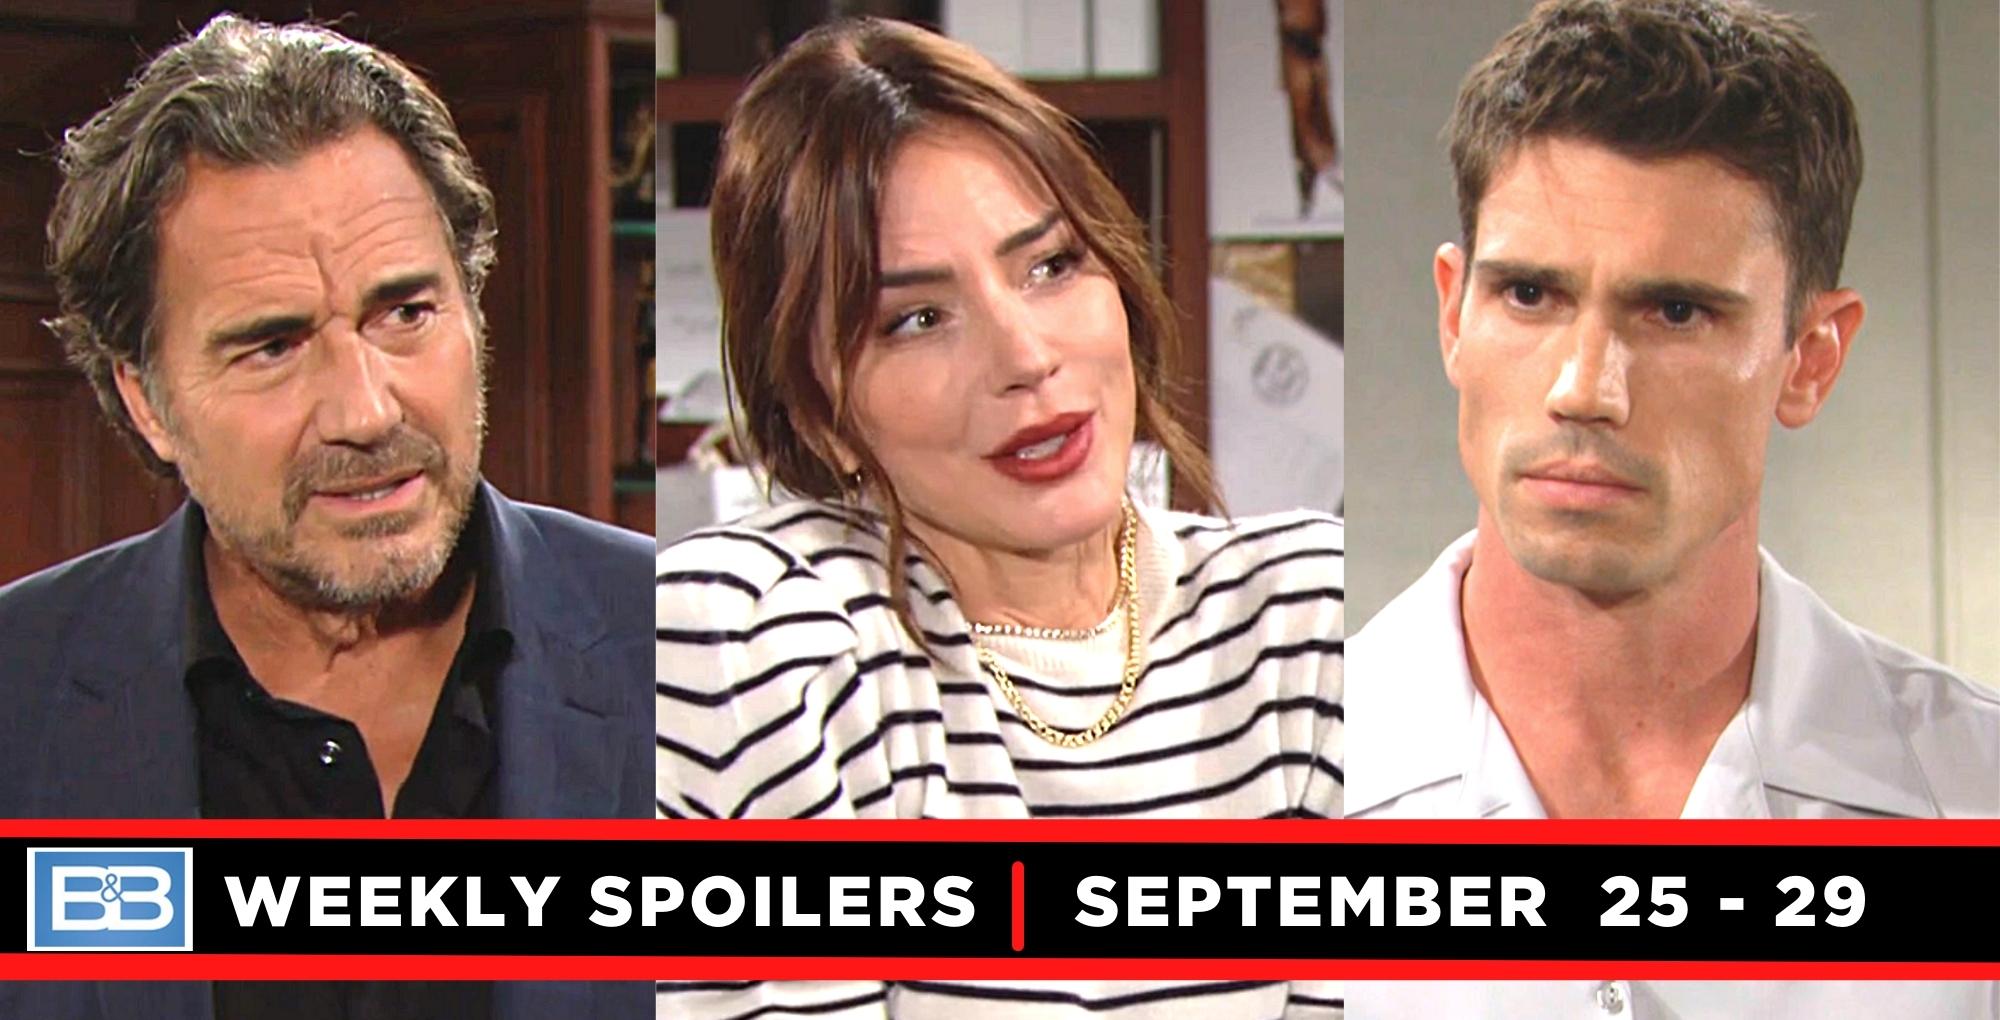 the bold and the beautiful spoilers for september 25 - 29, 2023, have ridge, taylor, and finn.